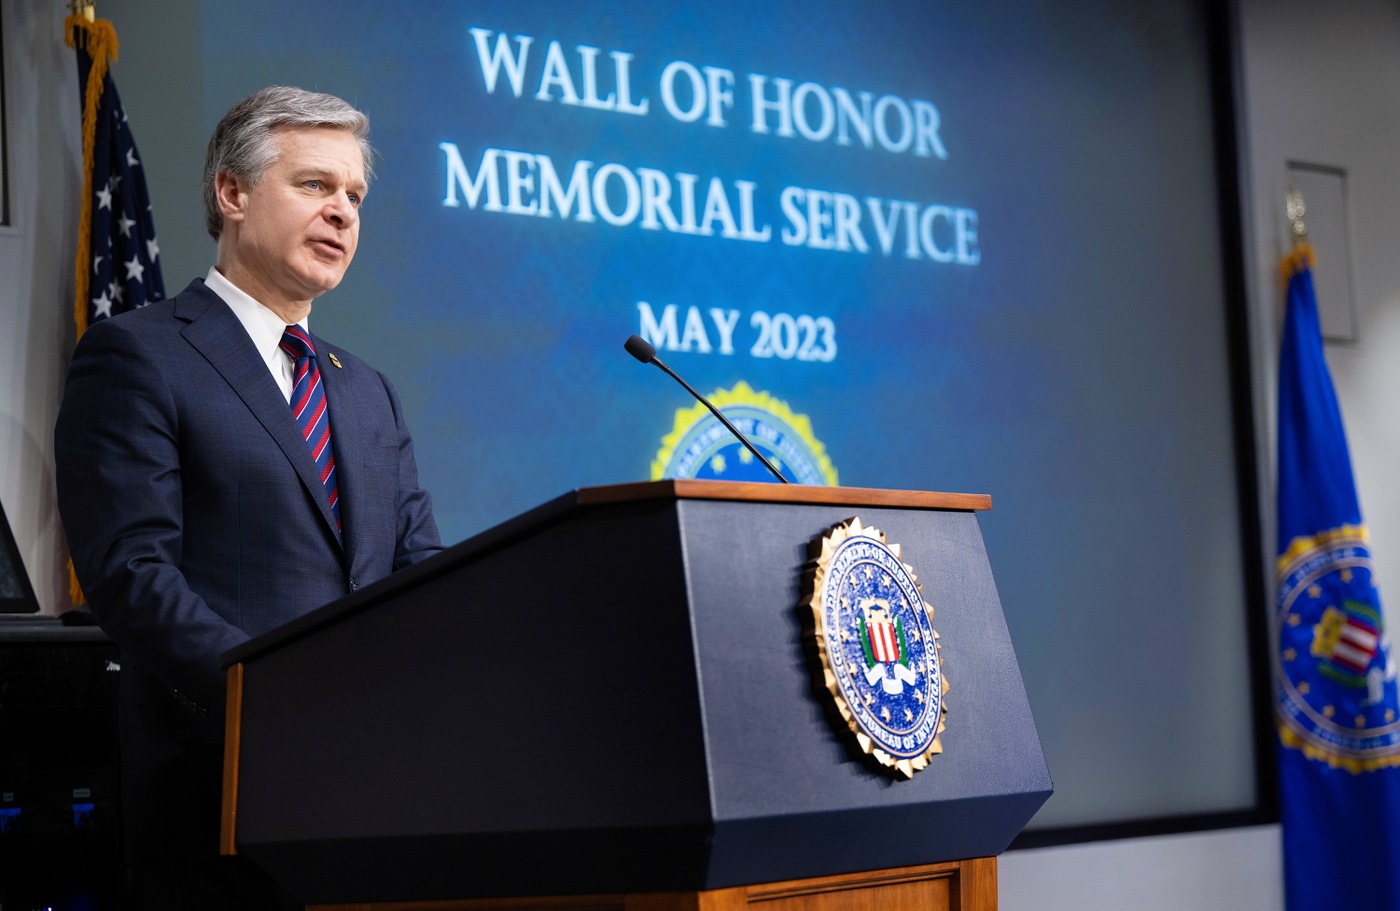 FBI Director Christopher Wray speaks at a Wall of Honor Memorial Ceremony at FBI Headquarters on May 11, 2023. Two new names were added to the FBI's Wall of Honor: Supervisory Police Officer (Lt.) Yiu Tak "Louis" Tao and Supervisory Administrative Specialist Bryan A. Myers. Both died in 2022 from illnesses related to toxic air exposure during 9/11 recovery efforts.